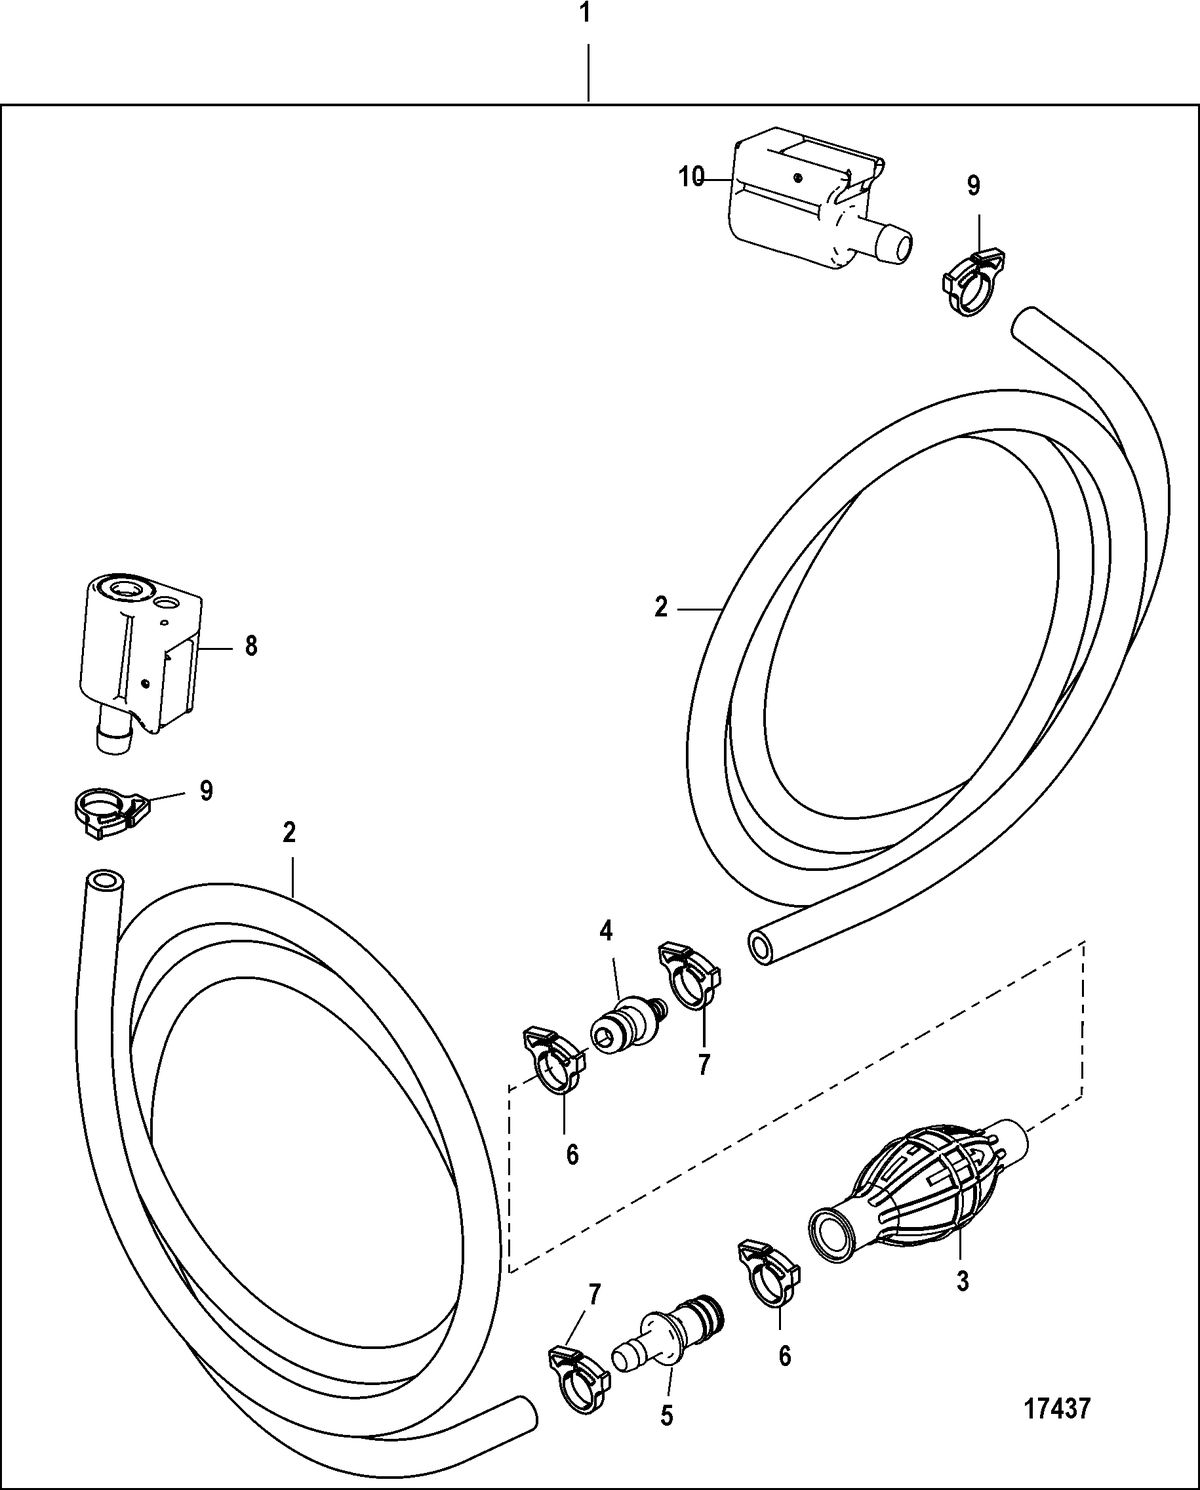 ACCESSORIES FUEL/OIL TANKS, LINES, FILTER KITS AND CORROSION Fuel Line Assembly (Dual Clip on Disconnect-Design II)